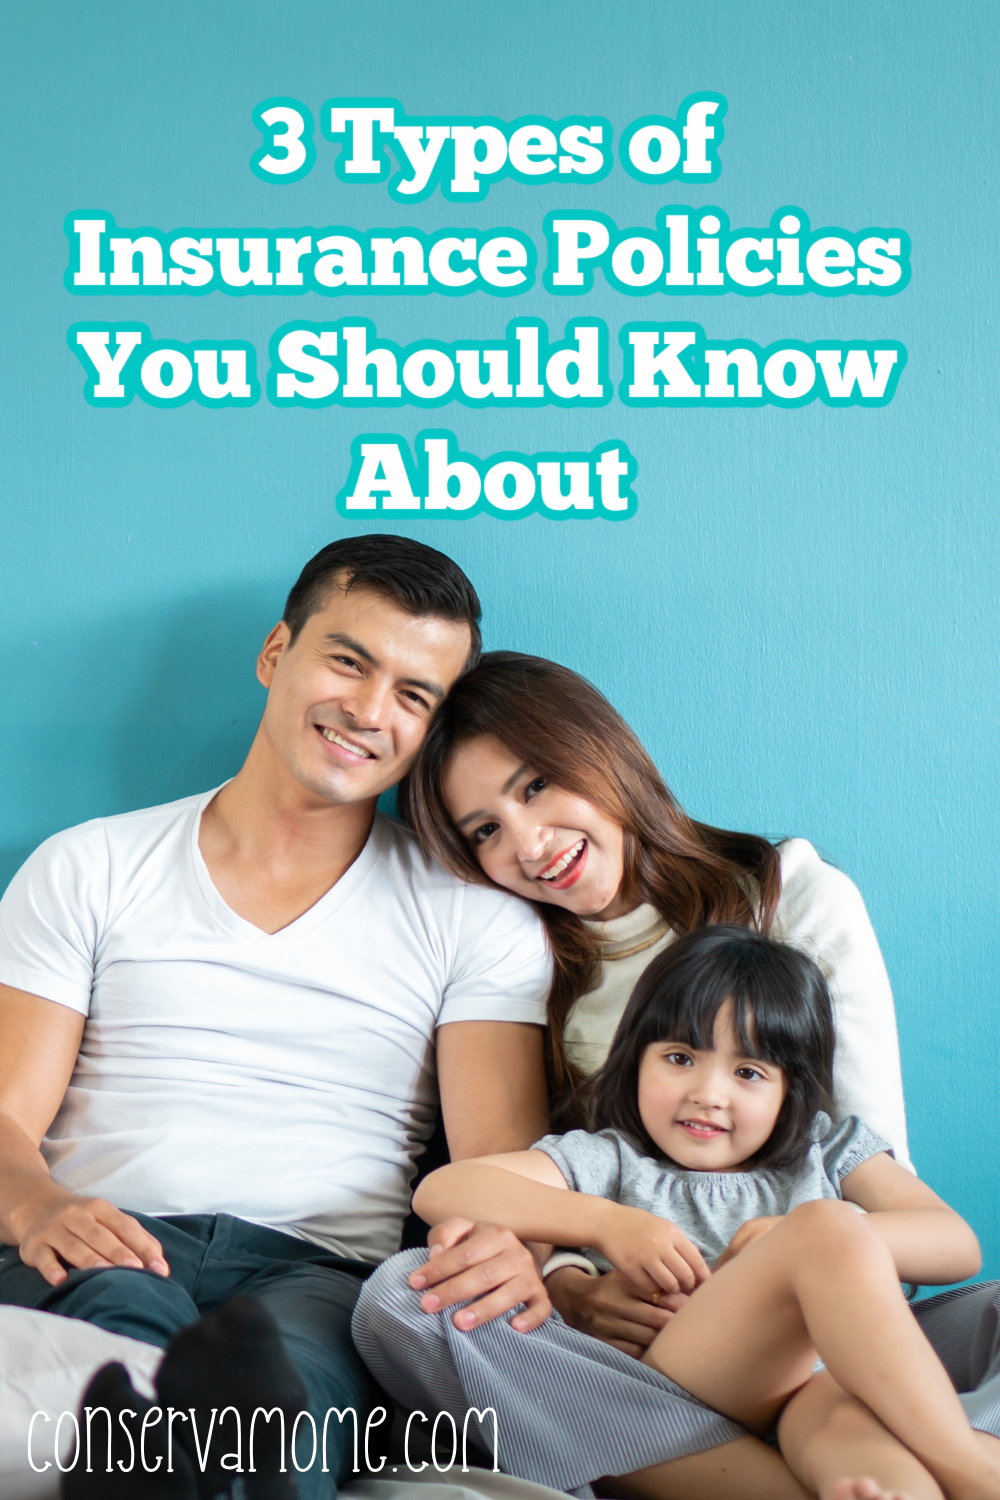 3 Types of Insurance Policies You Should Know About